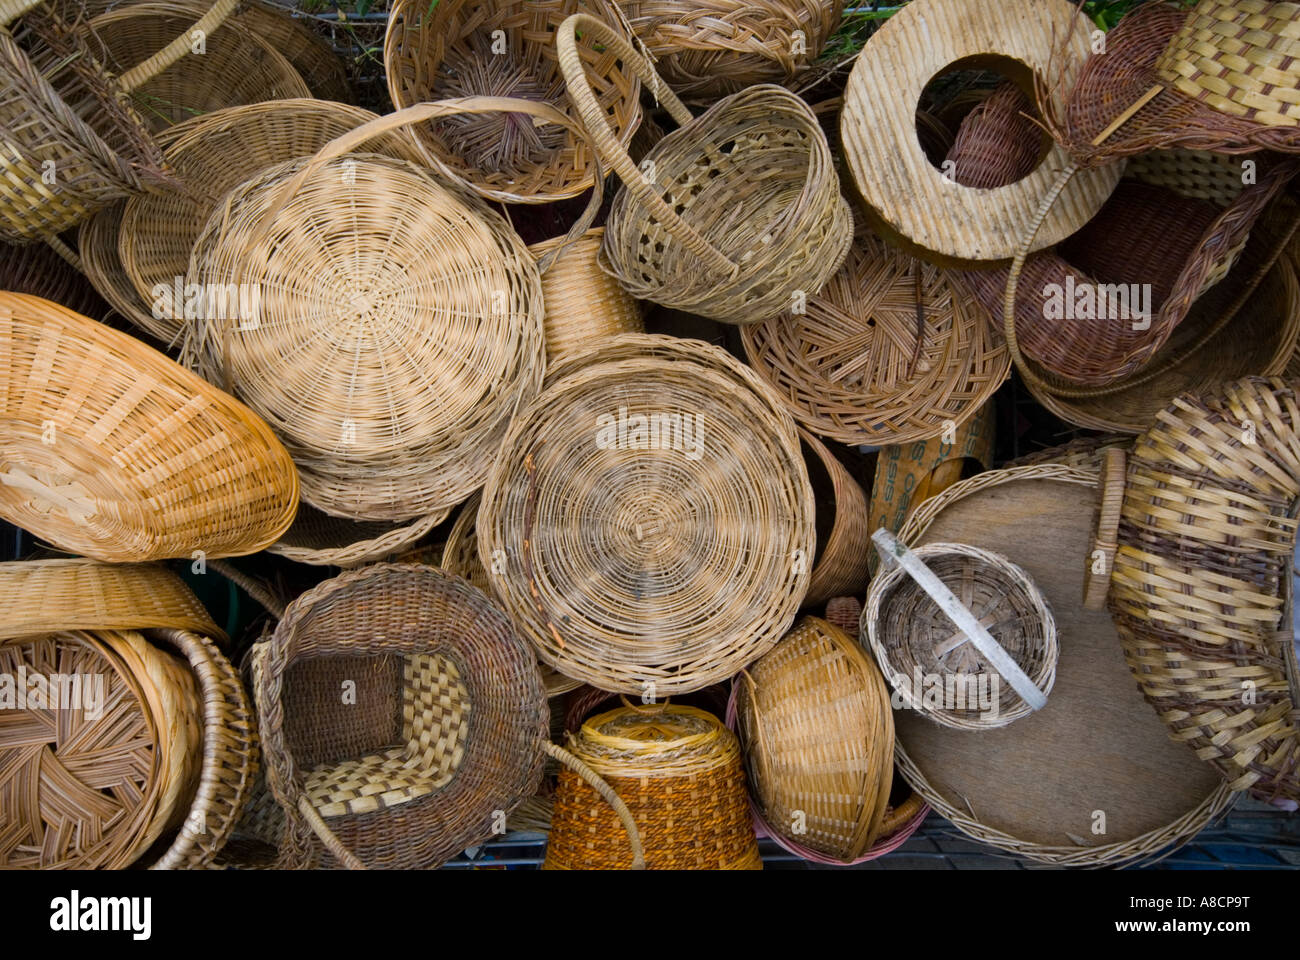 A collection of old baskets at a recycling centre Stock Photo